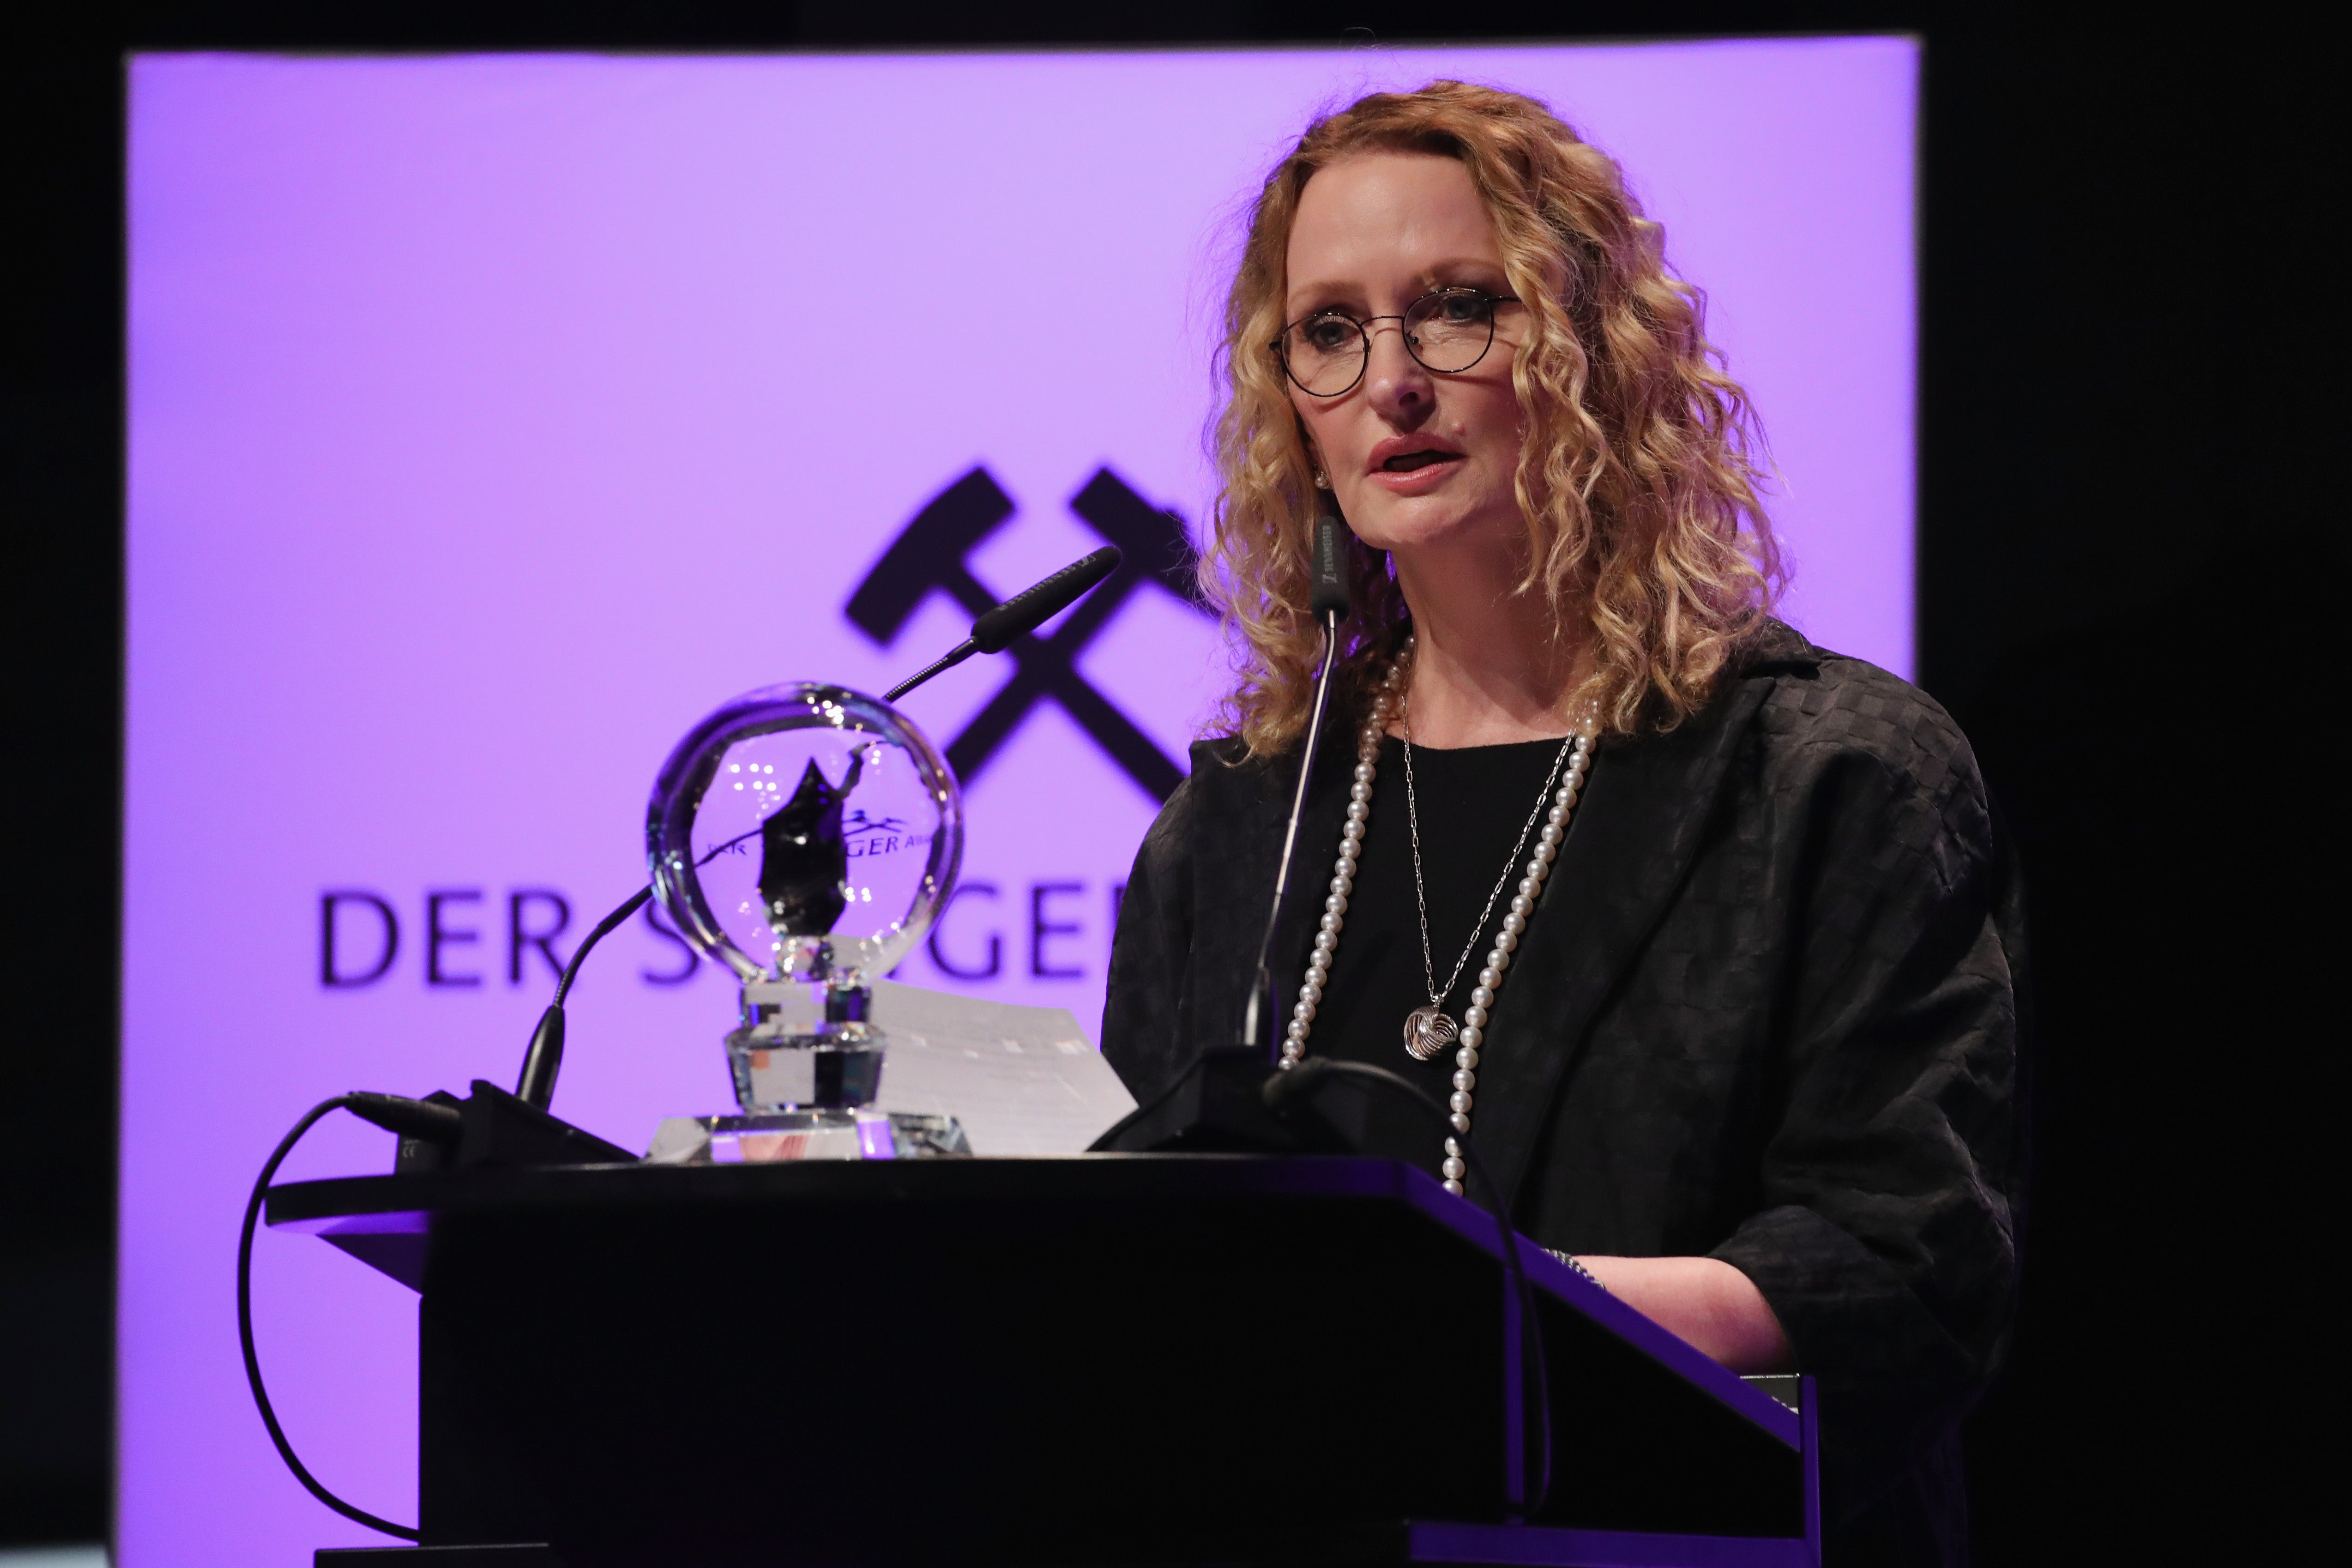 Geddes accepts a Steiger Award in 2018 at a ceremony in Dortmund, Germany